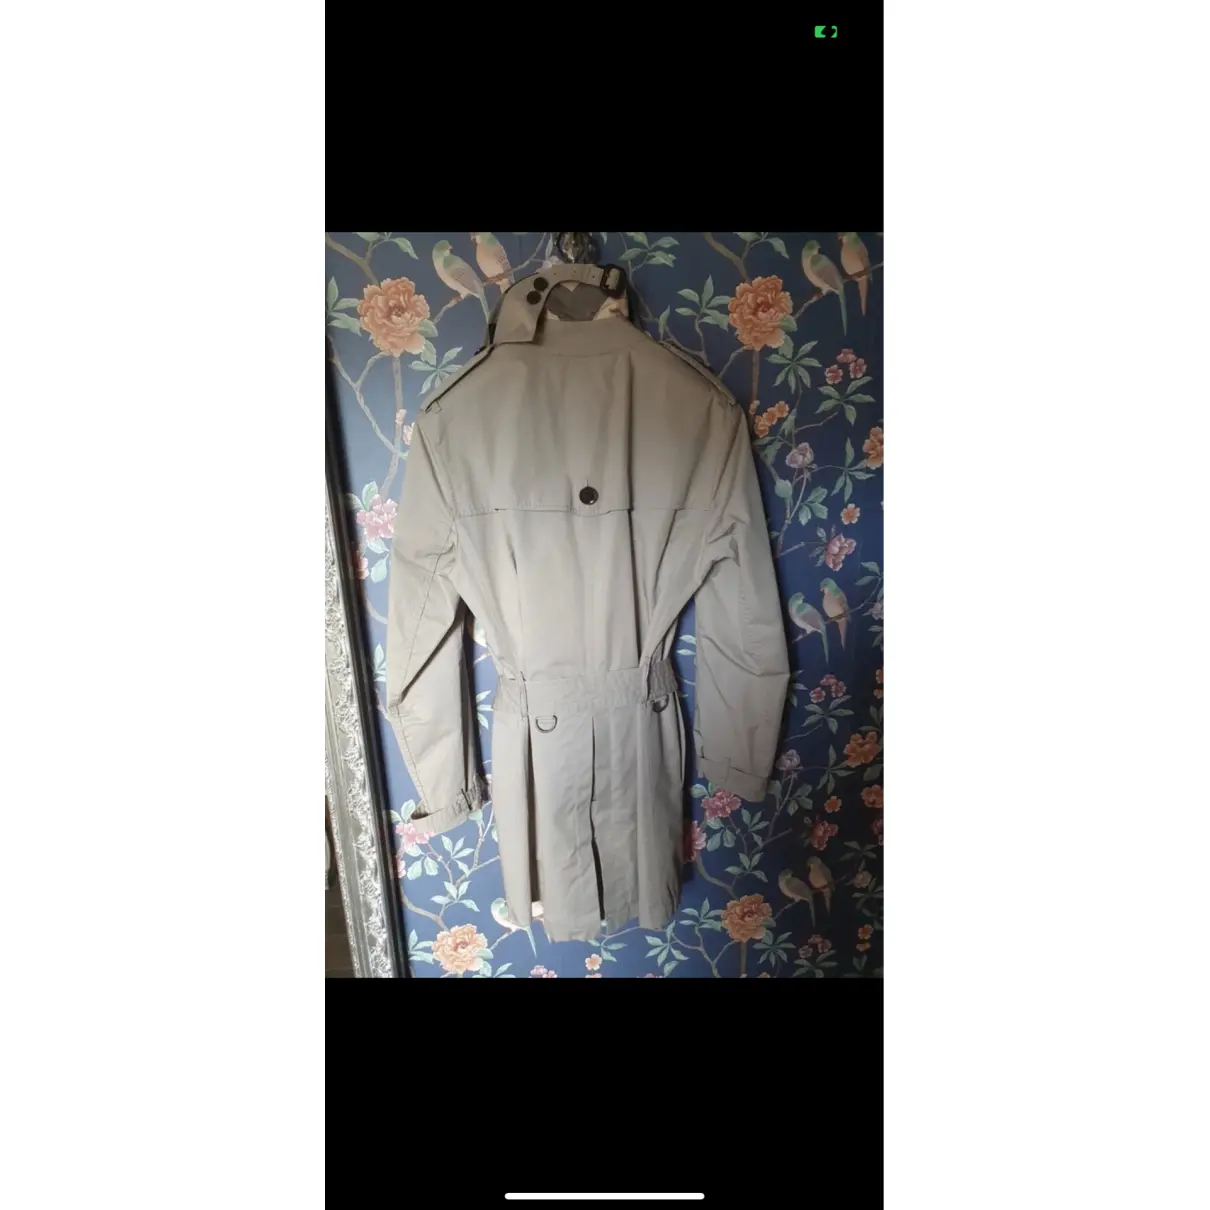 Buy Burberry Trench online